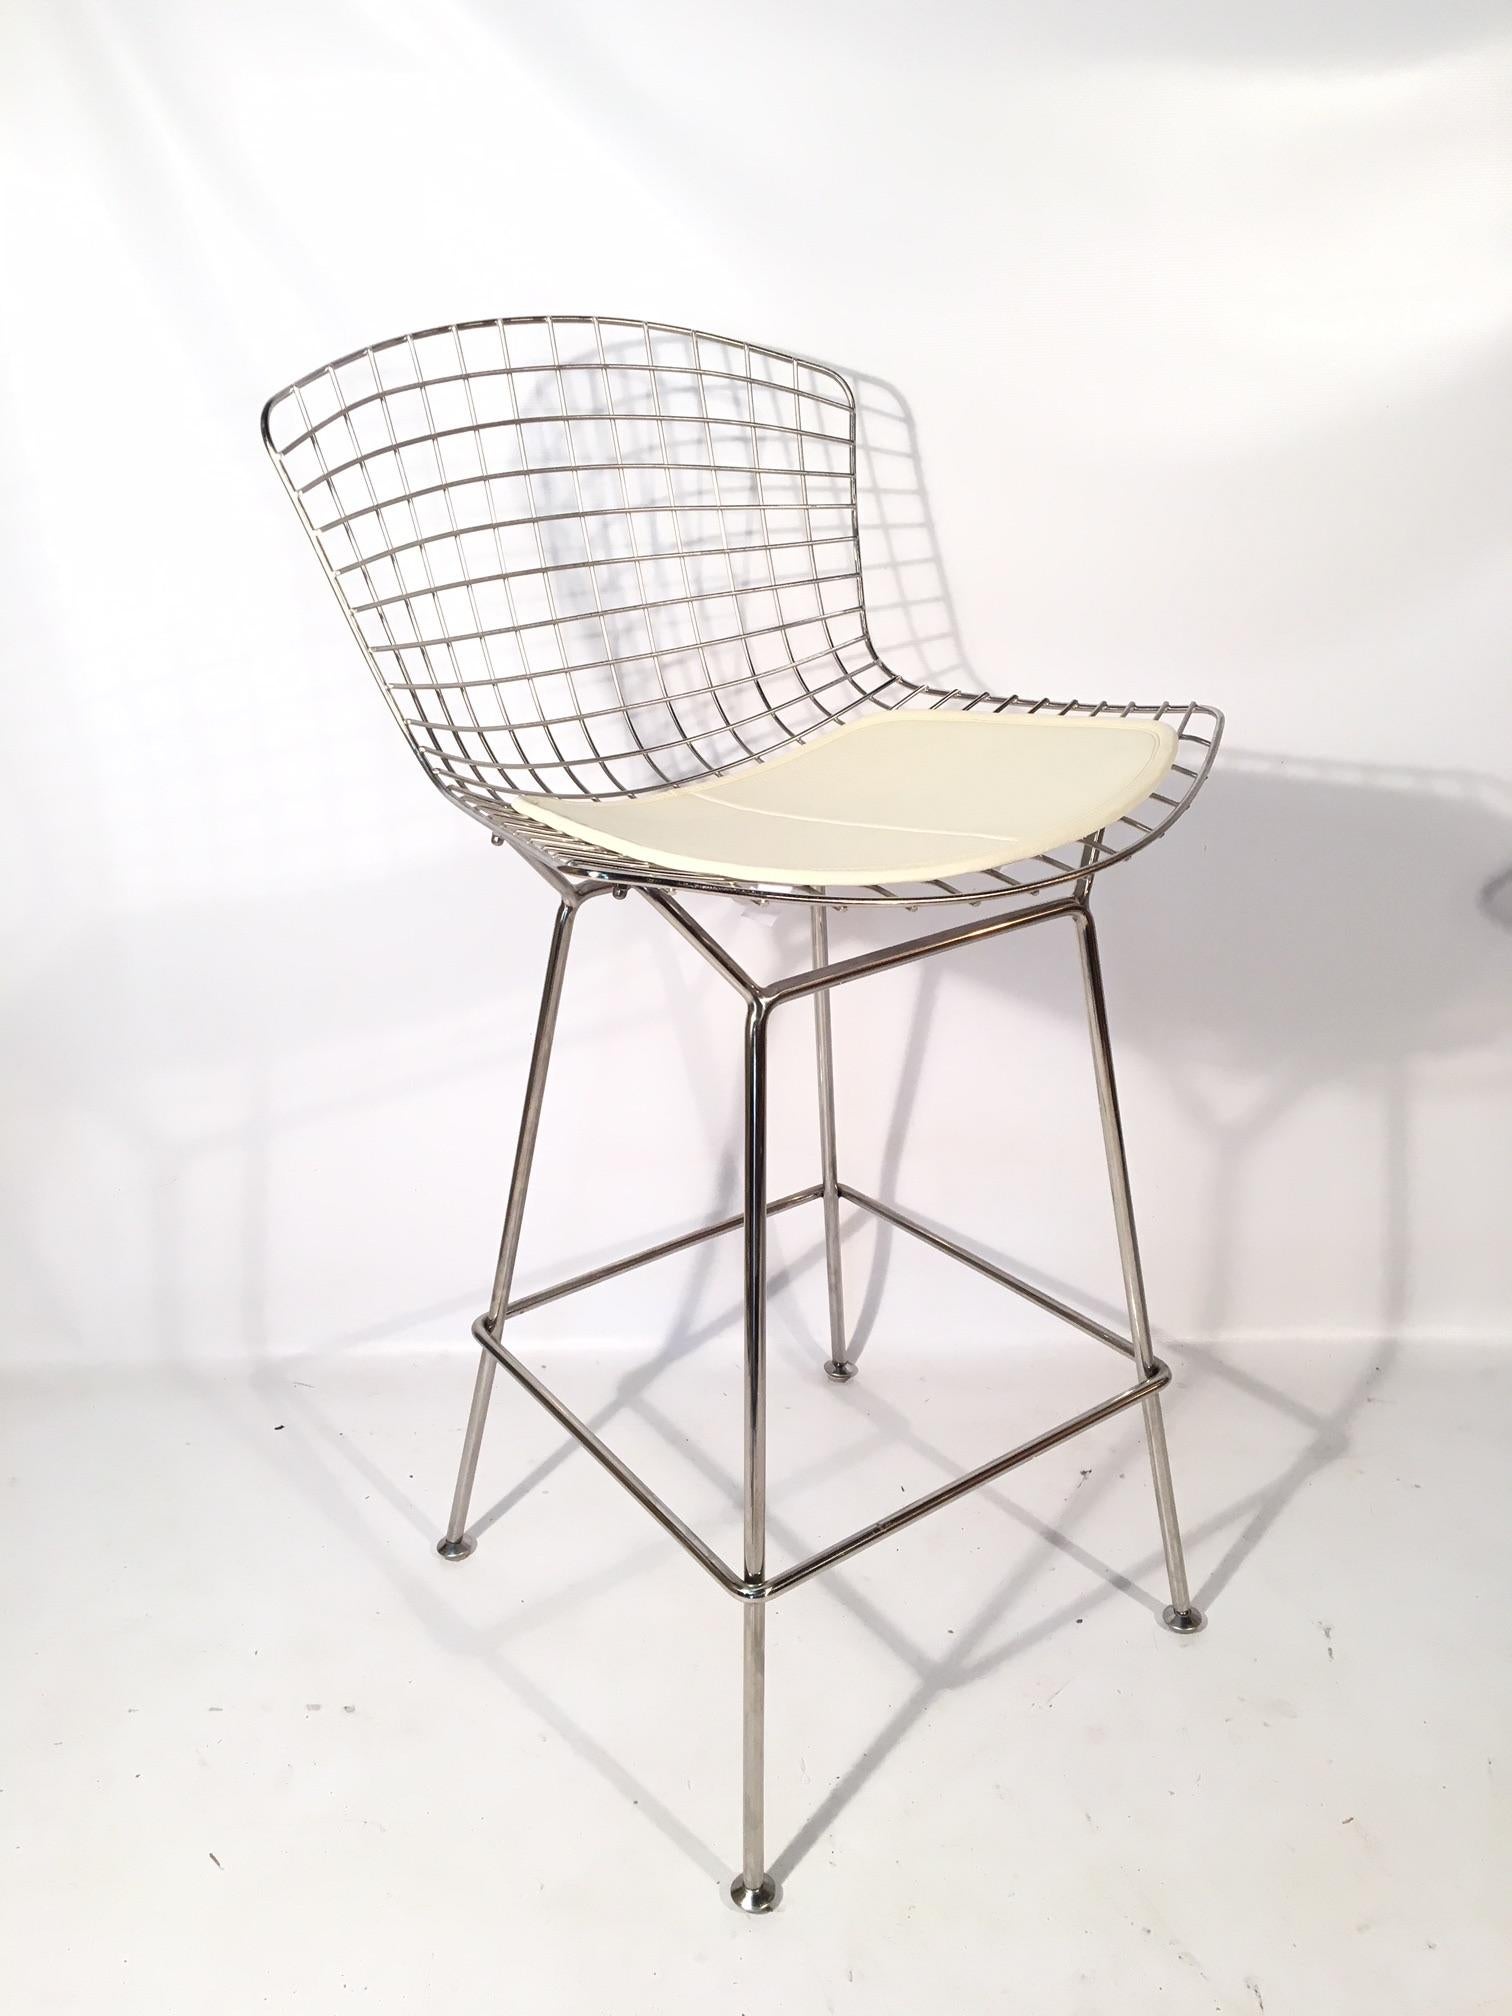 Set of five iconic chrome wire bar stools designed by Harry Bertoia for Knoll. This set is unmarked by Knoll, signifying a pre-2004 production. Frames in excellent condition with pads in very good condition showing very minor age appropriate wear.